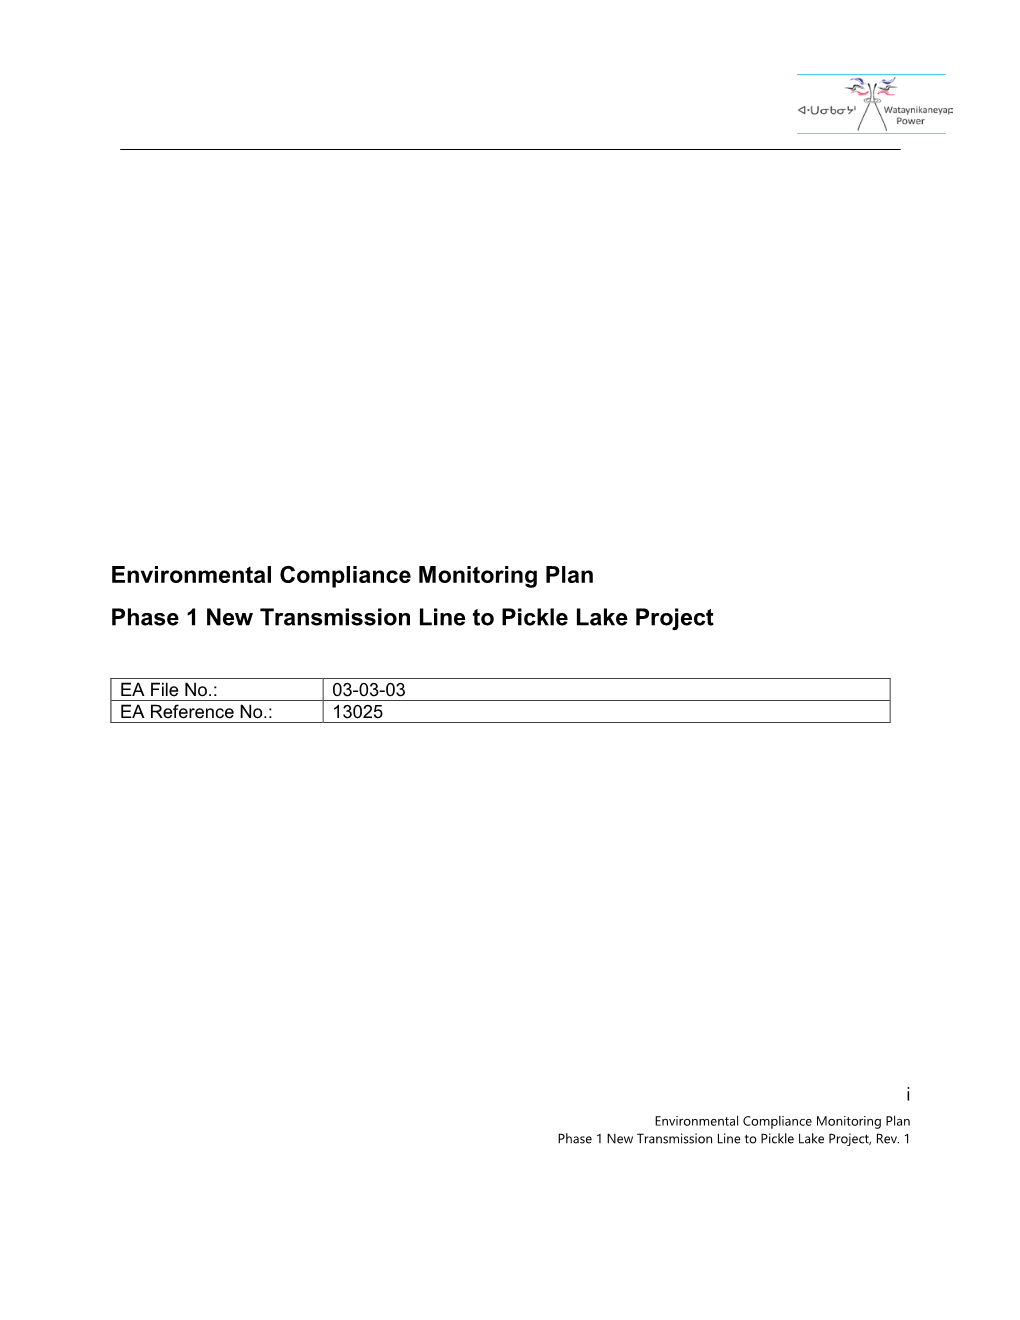 Environmental Compliance Monitoring Plan Phase 1 New Transmission Line to Pickle Lake Project